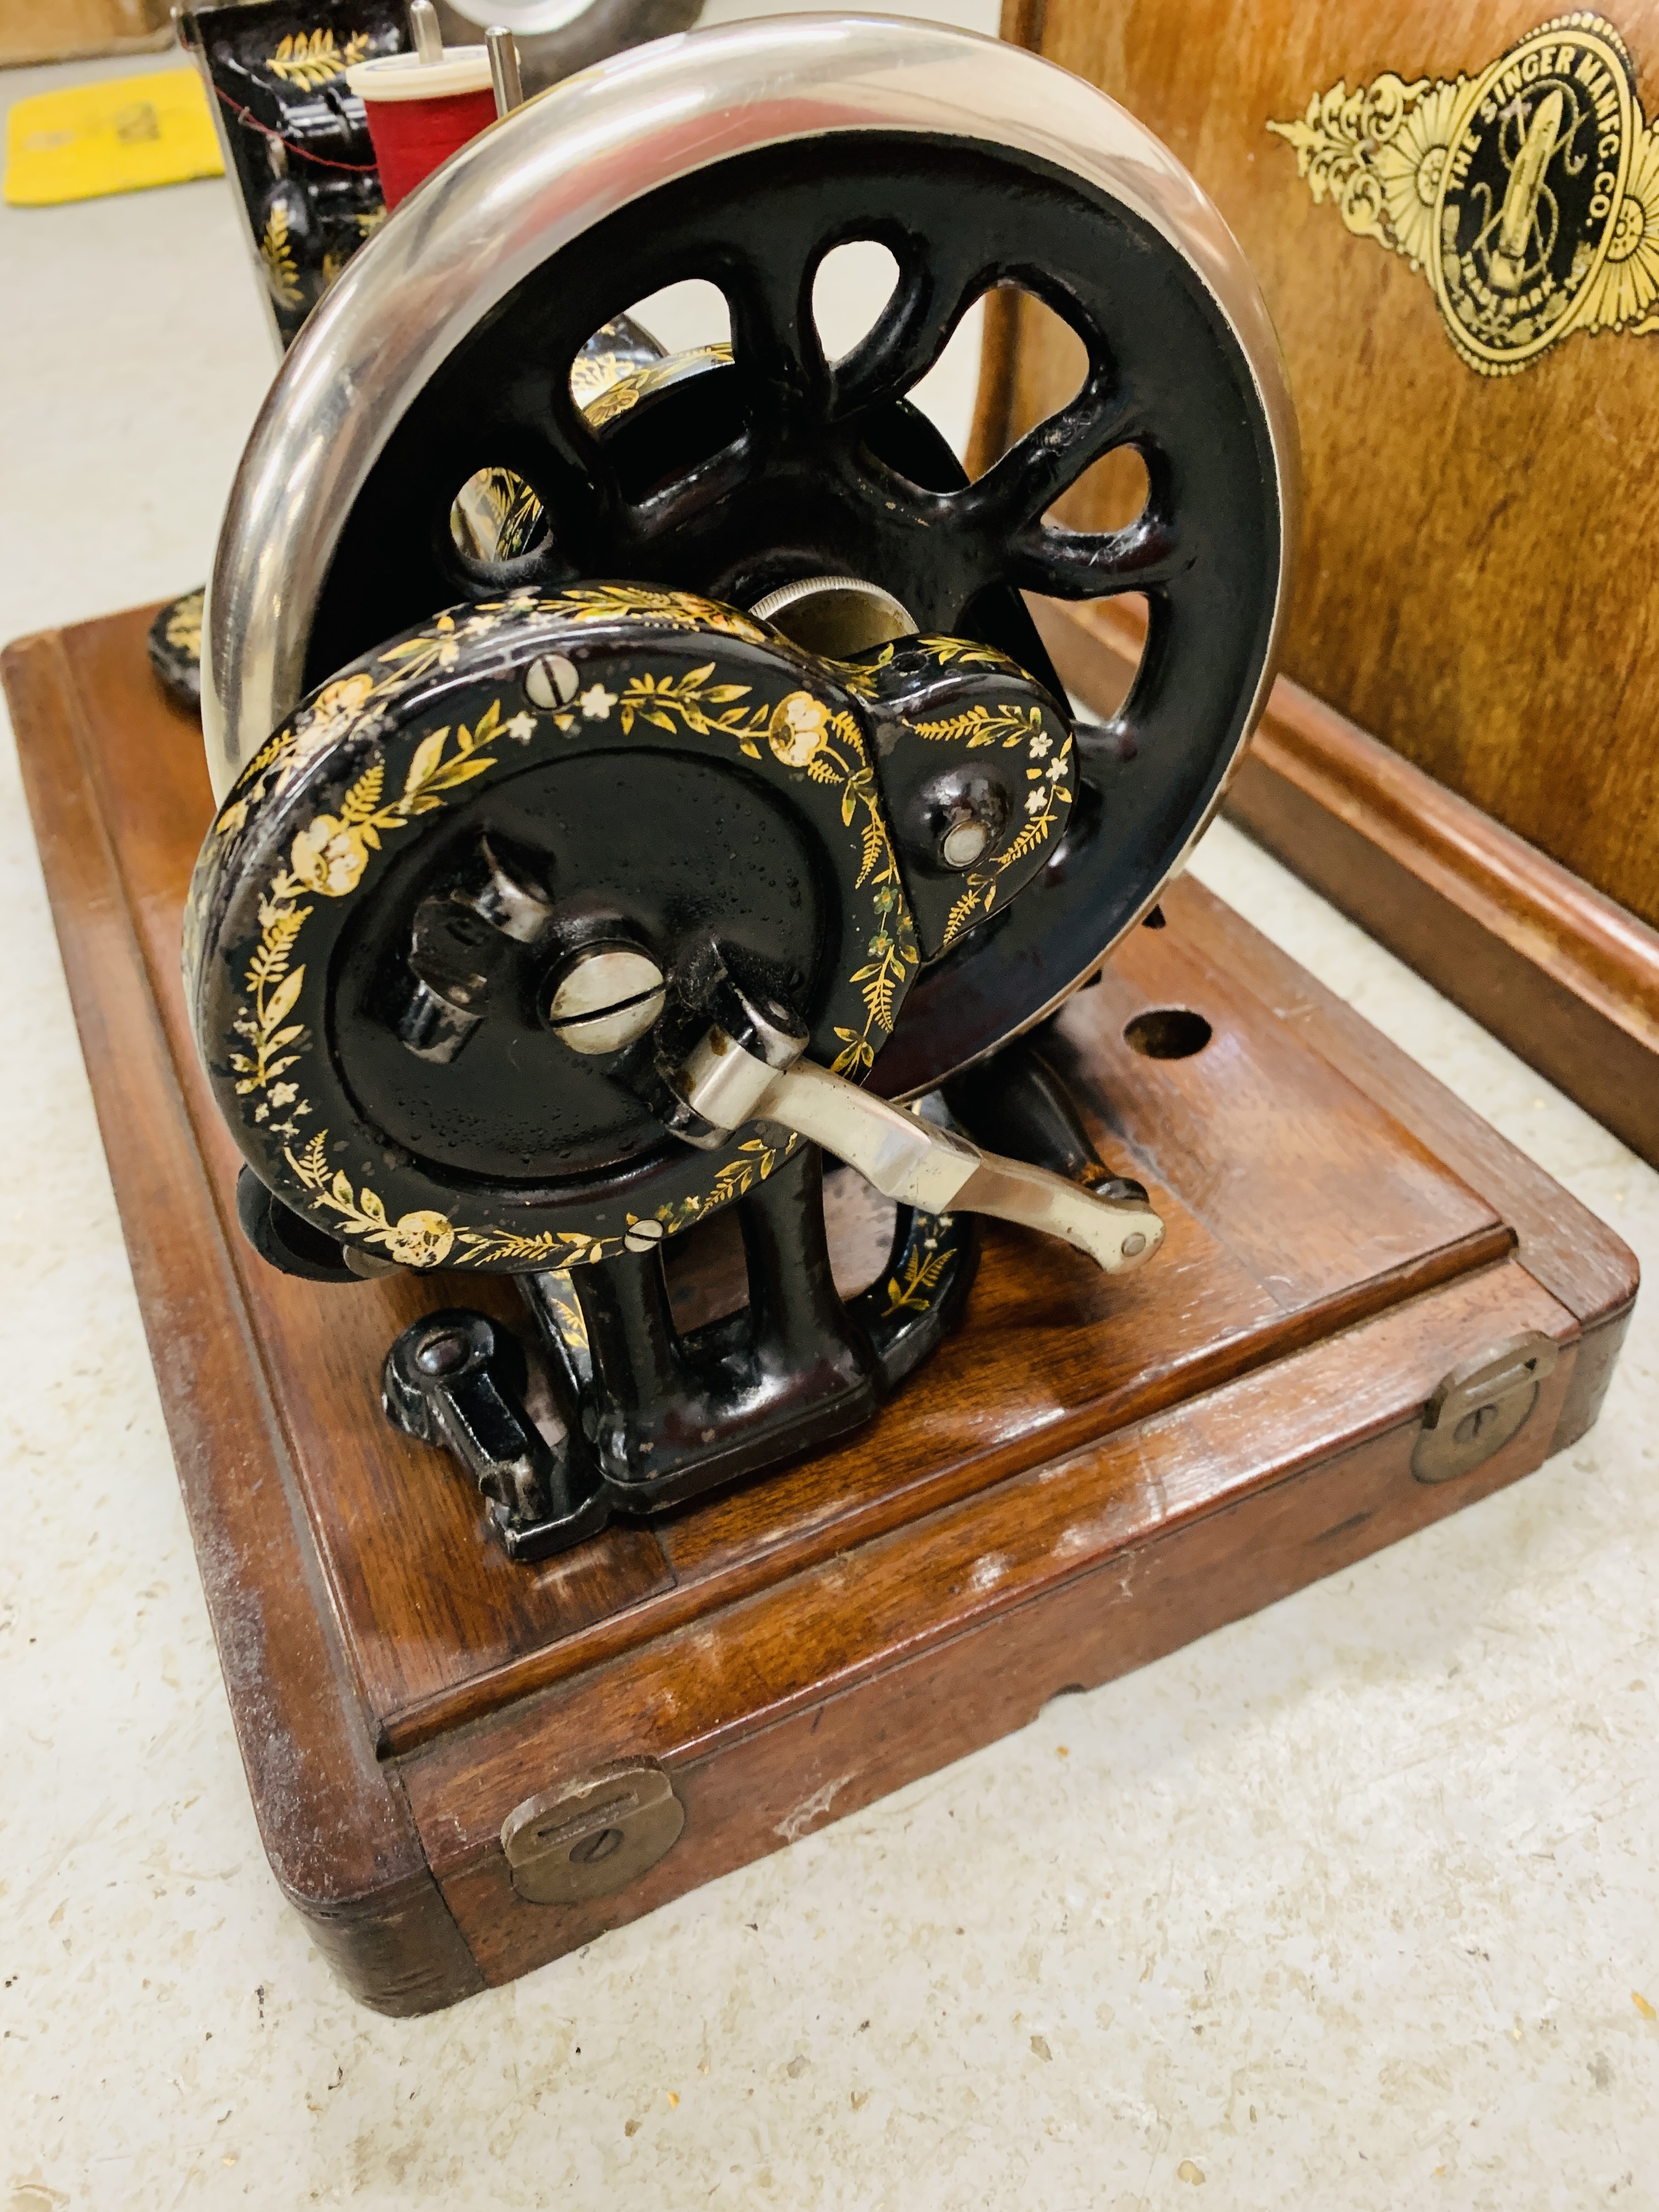 A VINTAGE SINGER GILT DECORATED MANUAL SEWING MACHINE UNDER ORIGINAL DOMED COVER - Image 3 of 6